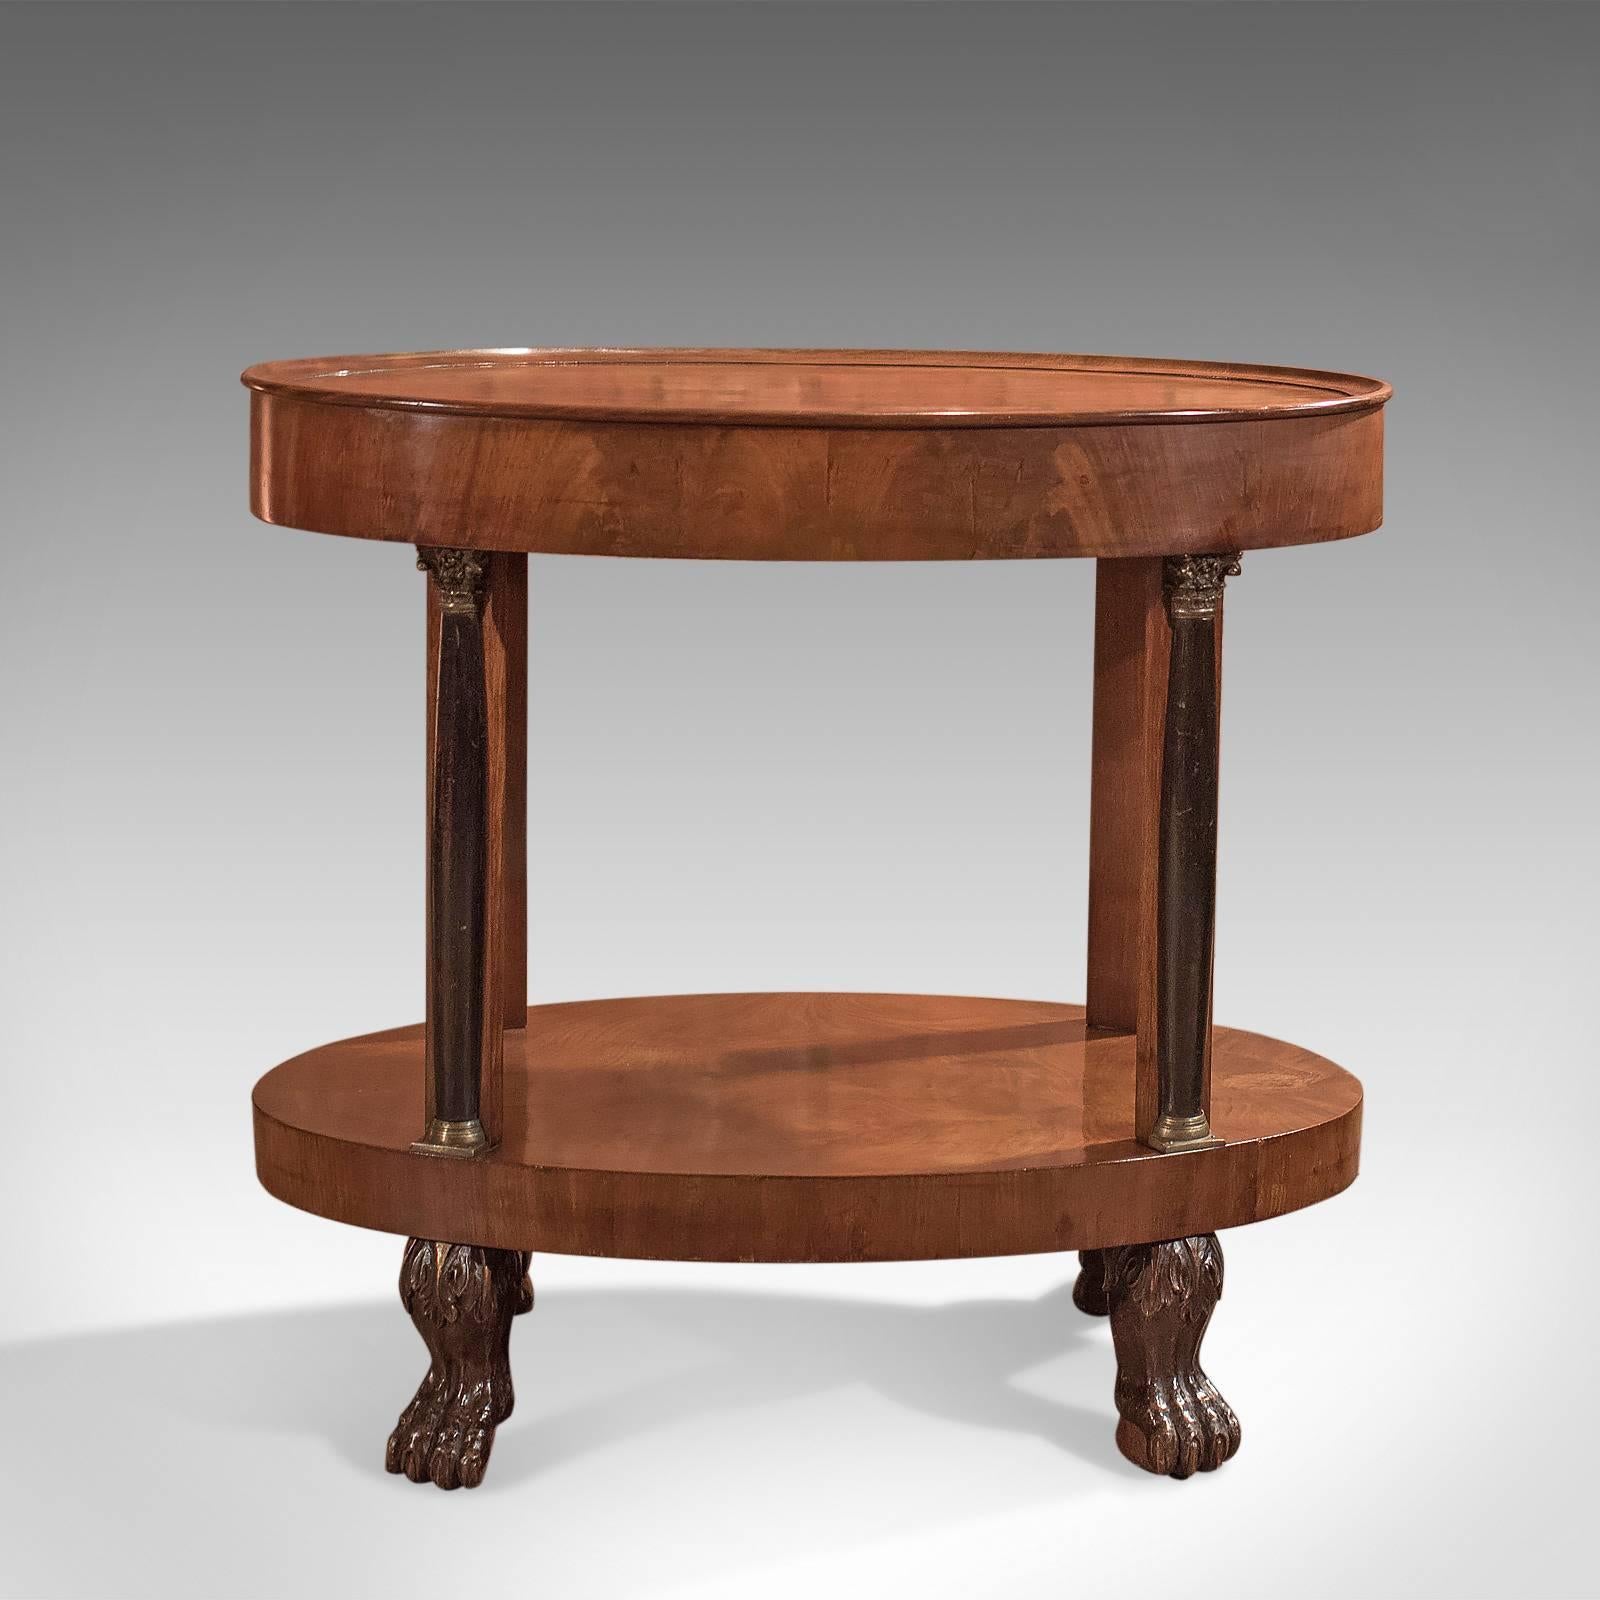 This is a super example of a French antique side table, or gueridon, in the cross-over from Directorie to Empire styles of the early 19th century, circa 1815.

Choice cuts of mahogany displaying good colour and grain detail
Ovular in form with